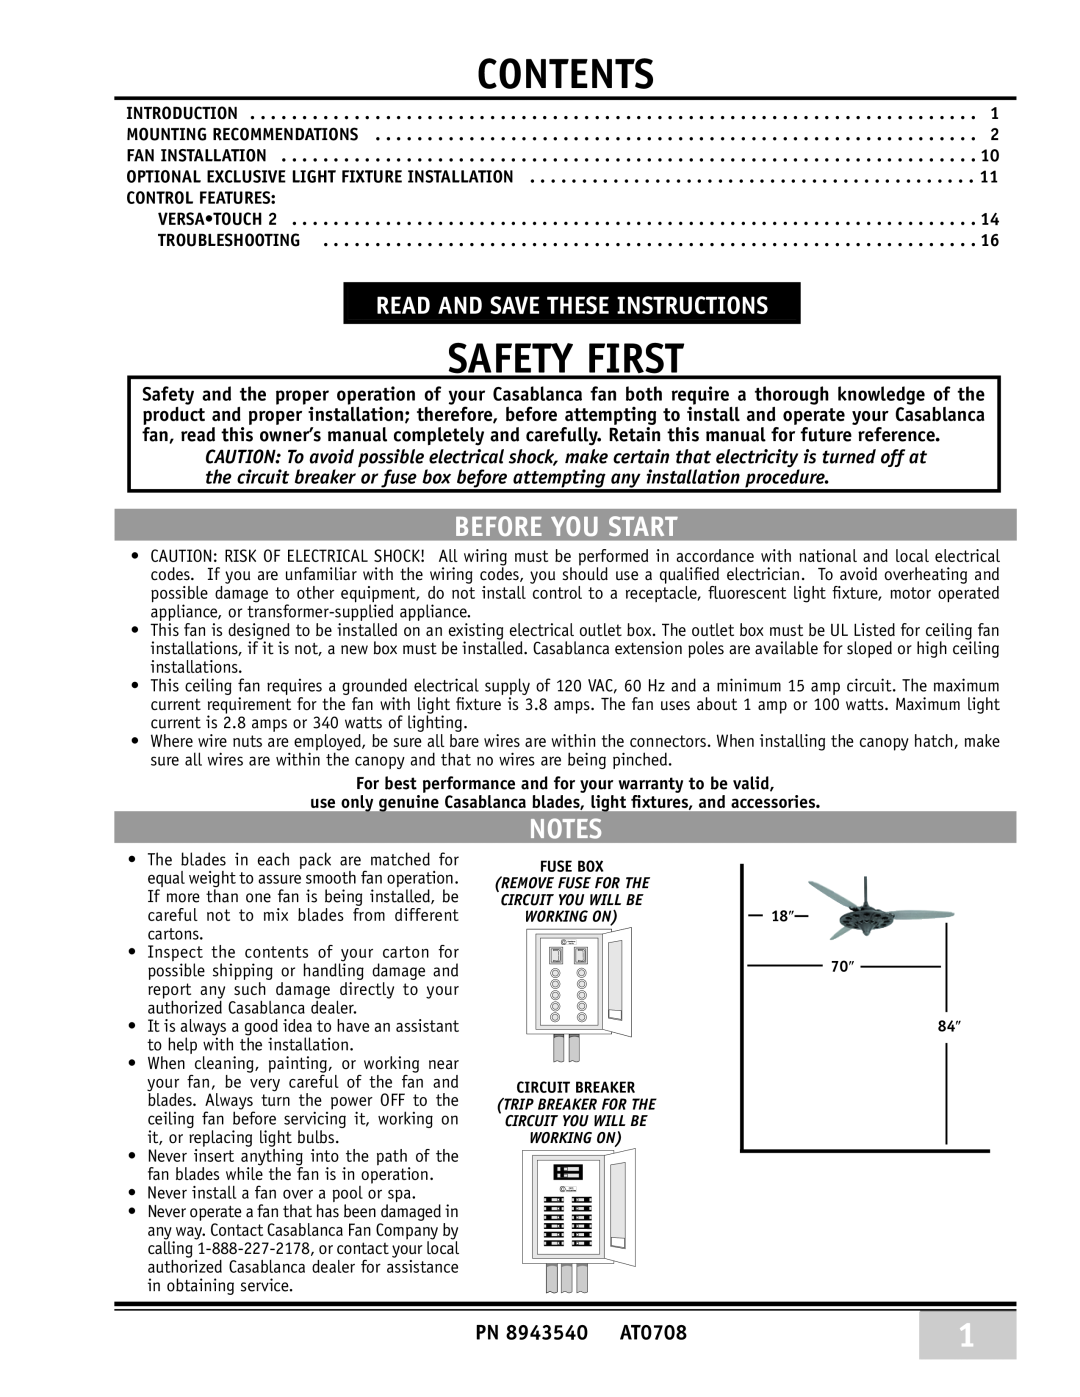 Casablanca Fan Company 89UXXM warranty Before You Start, Notes, Safety First, Contents, Read And Save These Instructions 